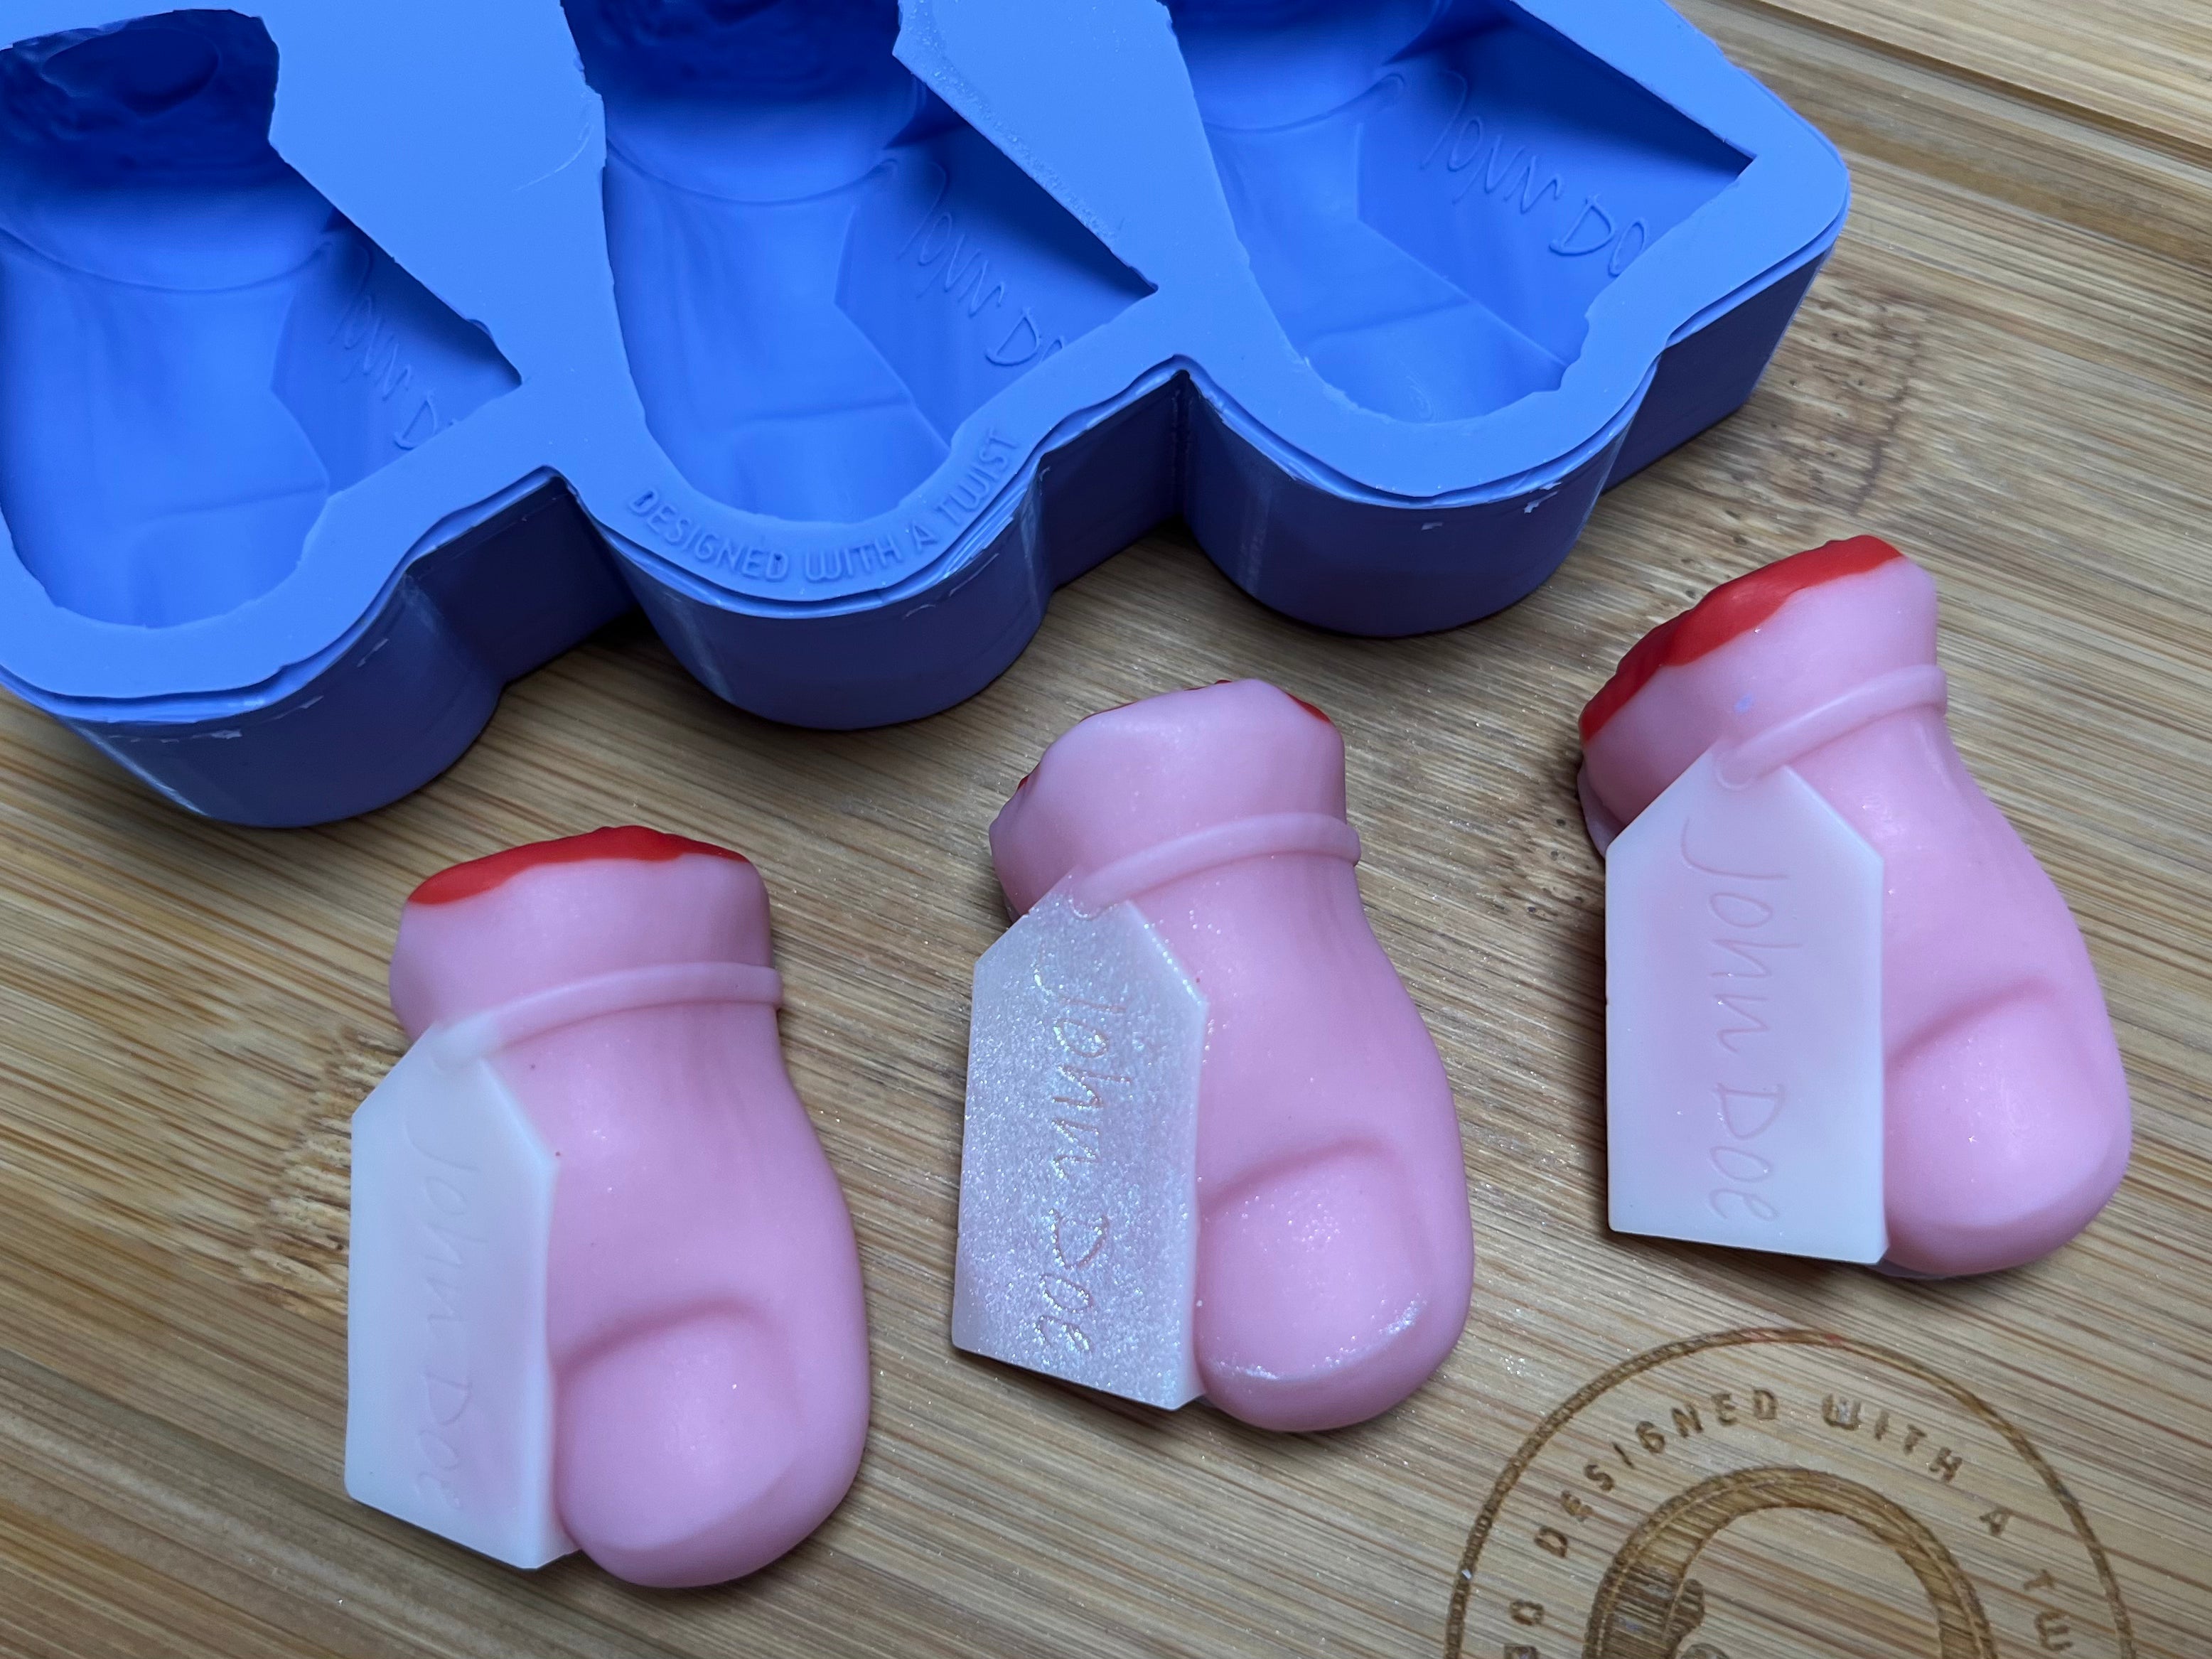 John Doe’s Toe Wax Melt Silicone Mold - Designed with a Twist - Top quality silicone molds made in the UK.